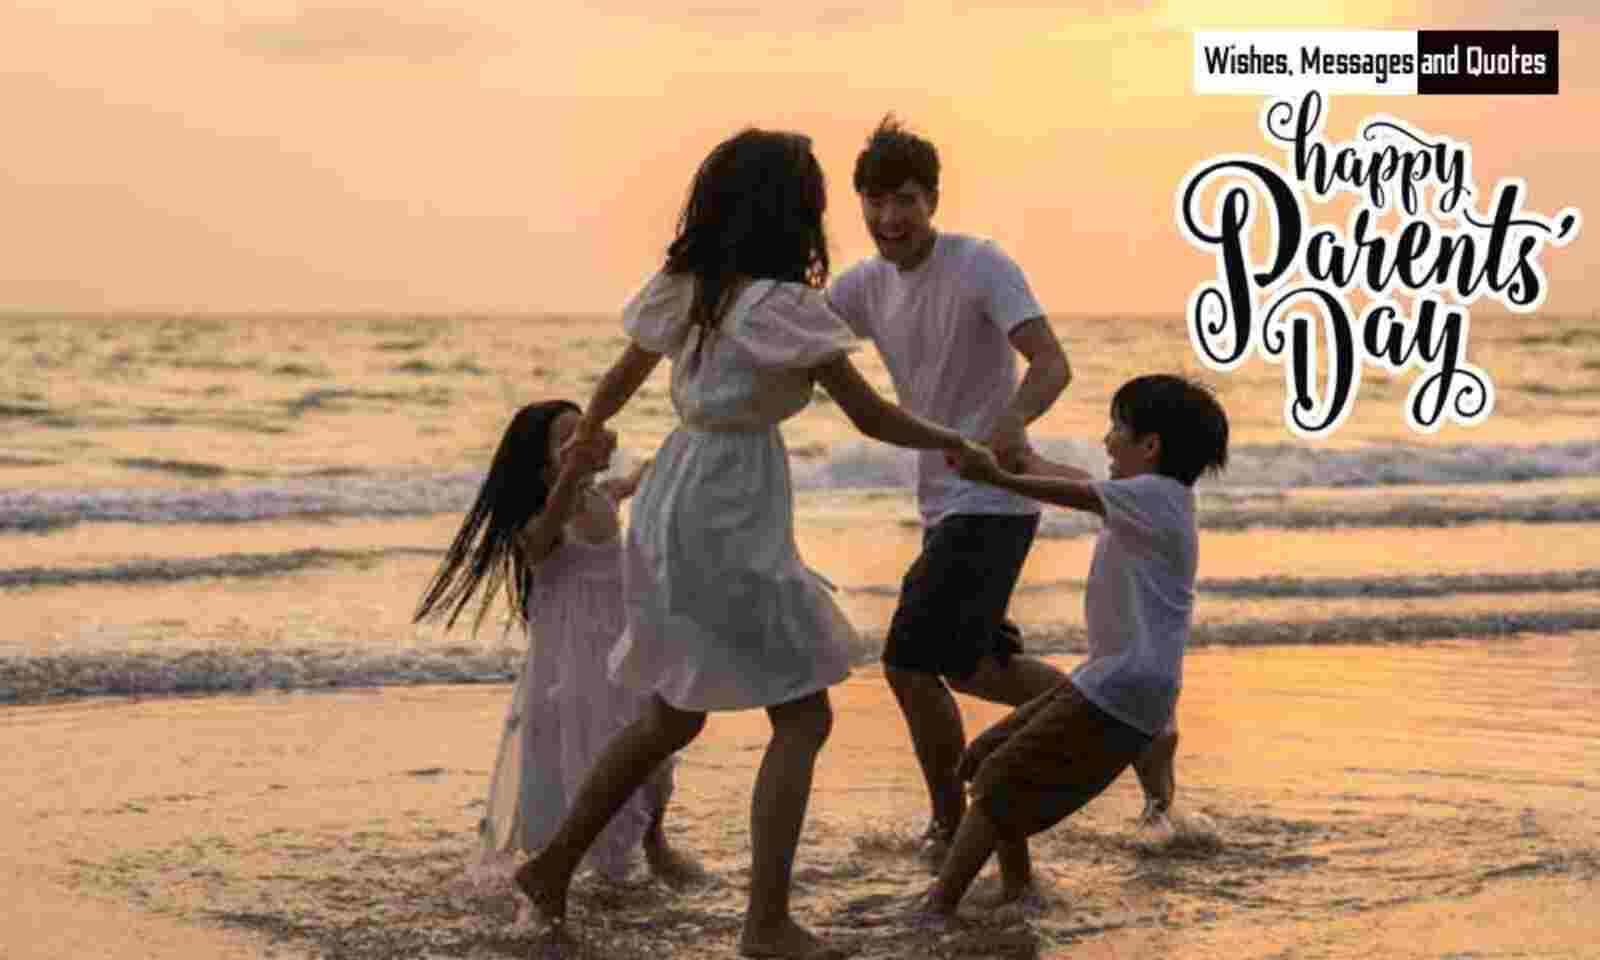 Global Day Of Parents 21 Wishes Messages Quotes Whatsapp Status To Share With Your Parents